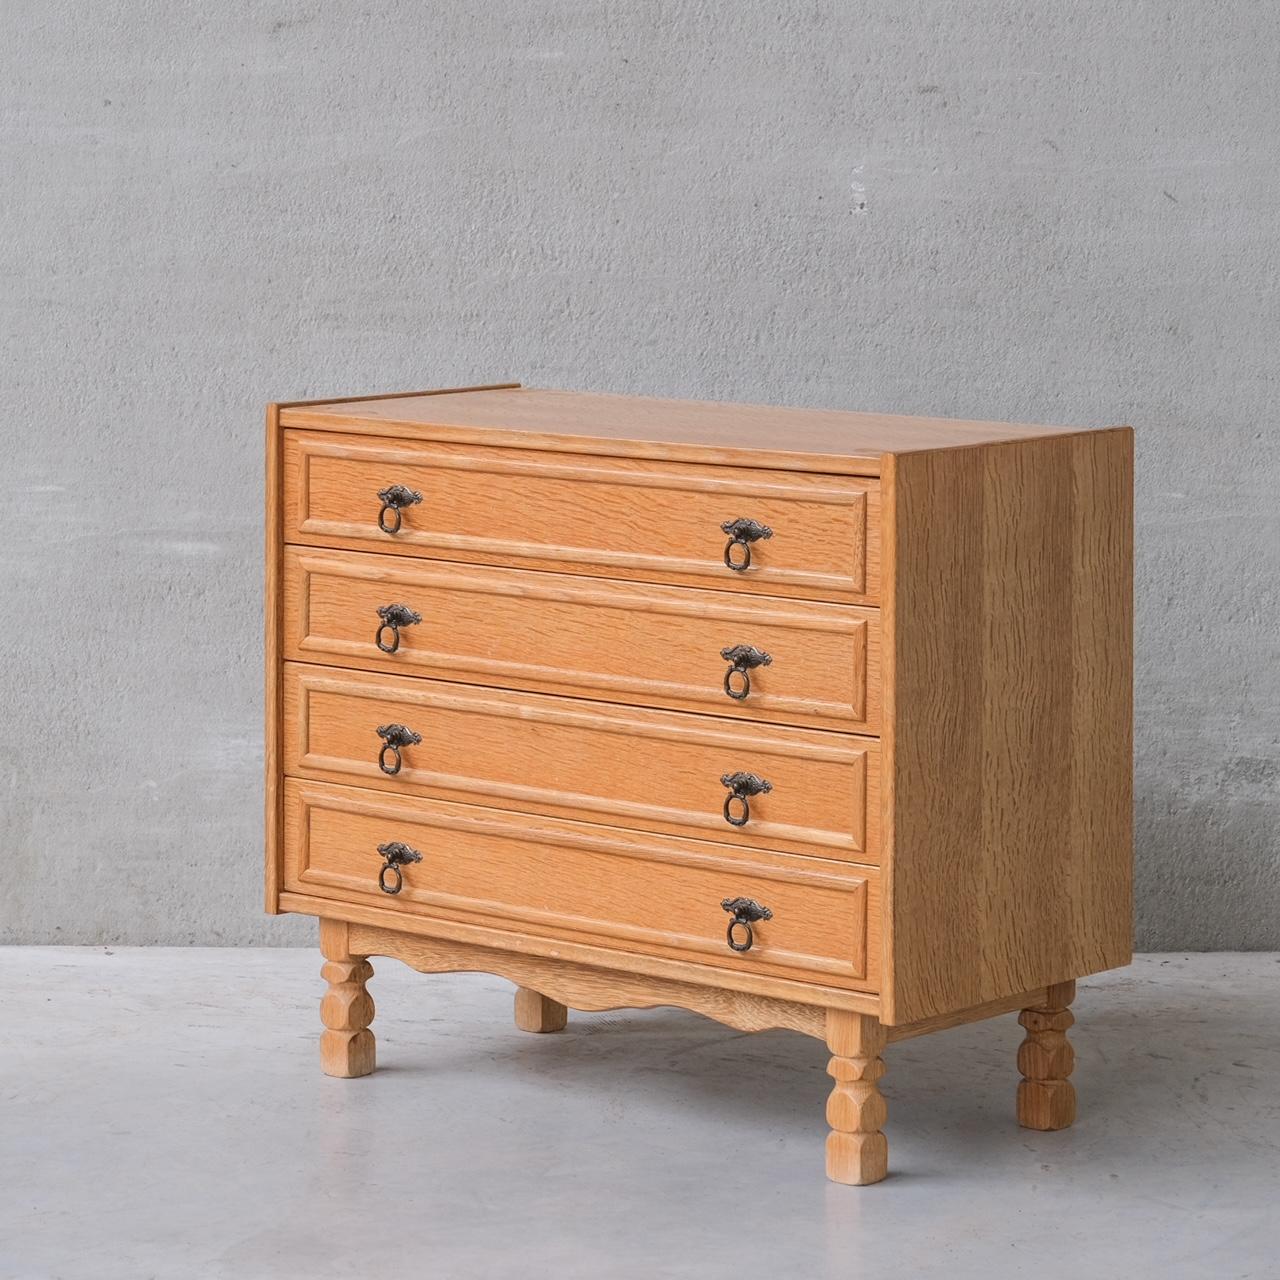 A single blonde oak chest of drawers.

Denmark, c1960s.

Four drawers with dual handles, with elegant carved base.

Good vintage condition, some scuffs and wear commensurate with age.

Internal Ref: 5/9/23/023.

Location: Belgium